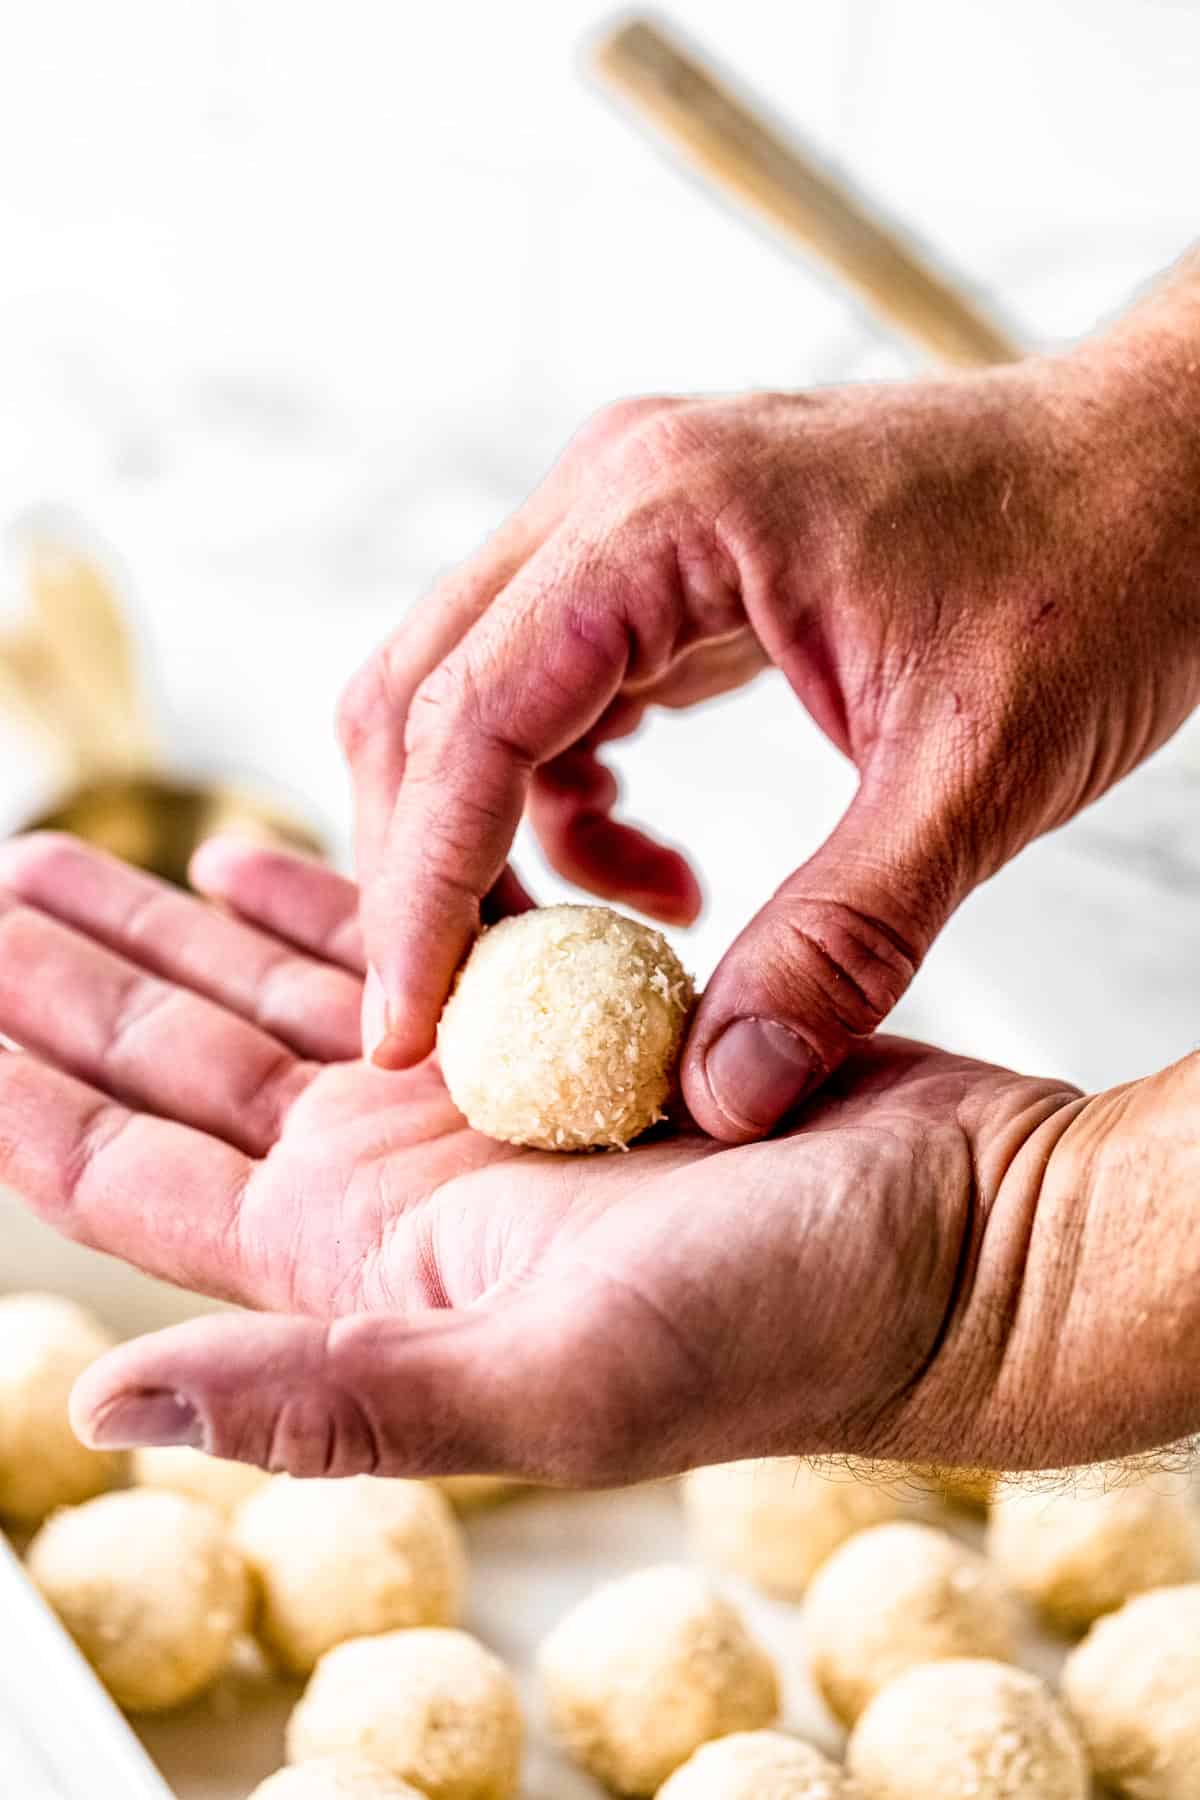 Hand forming a ball with the dough.